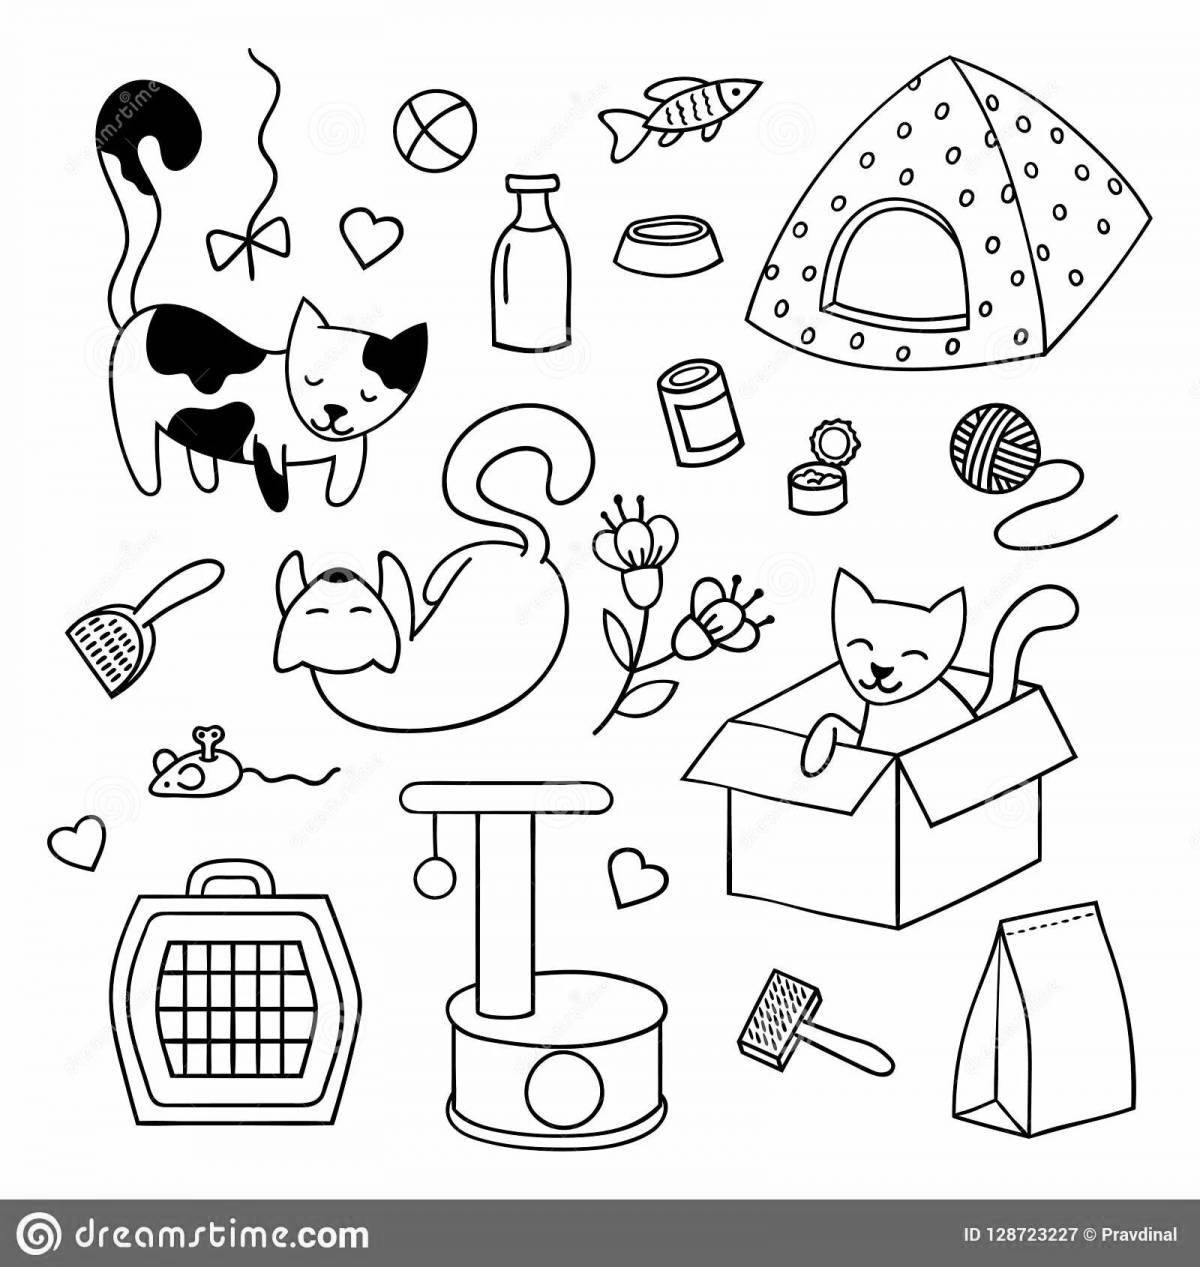 Fabulous cat food coloring page